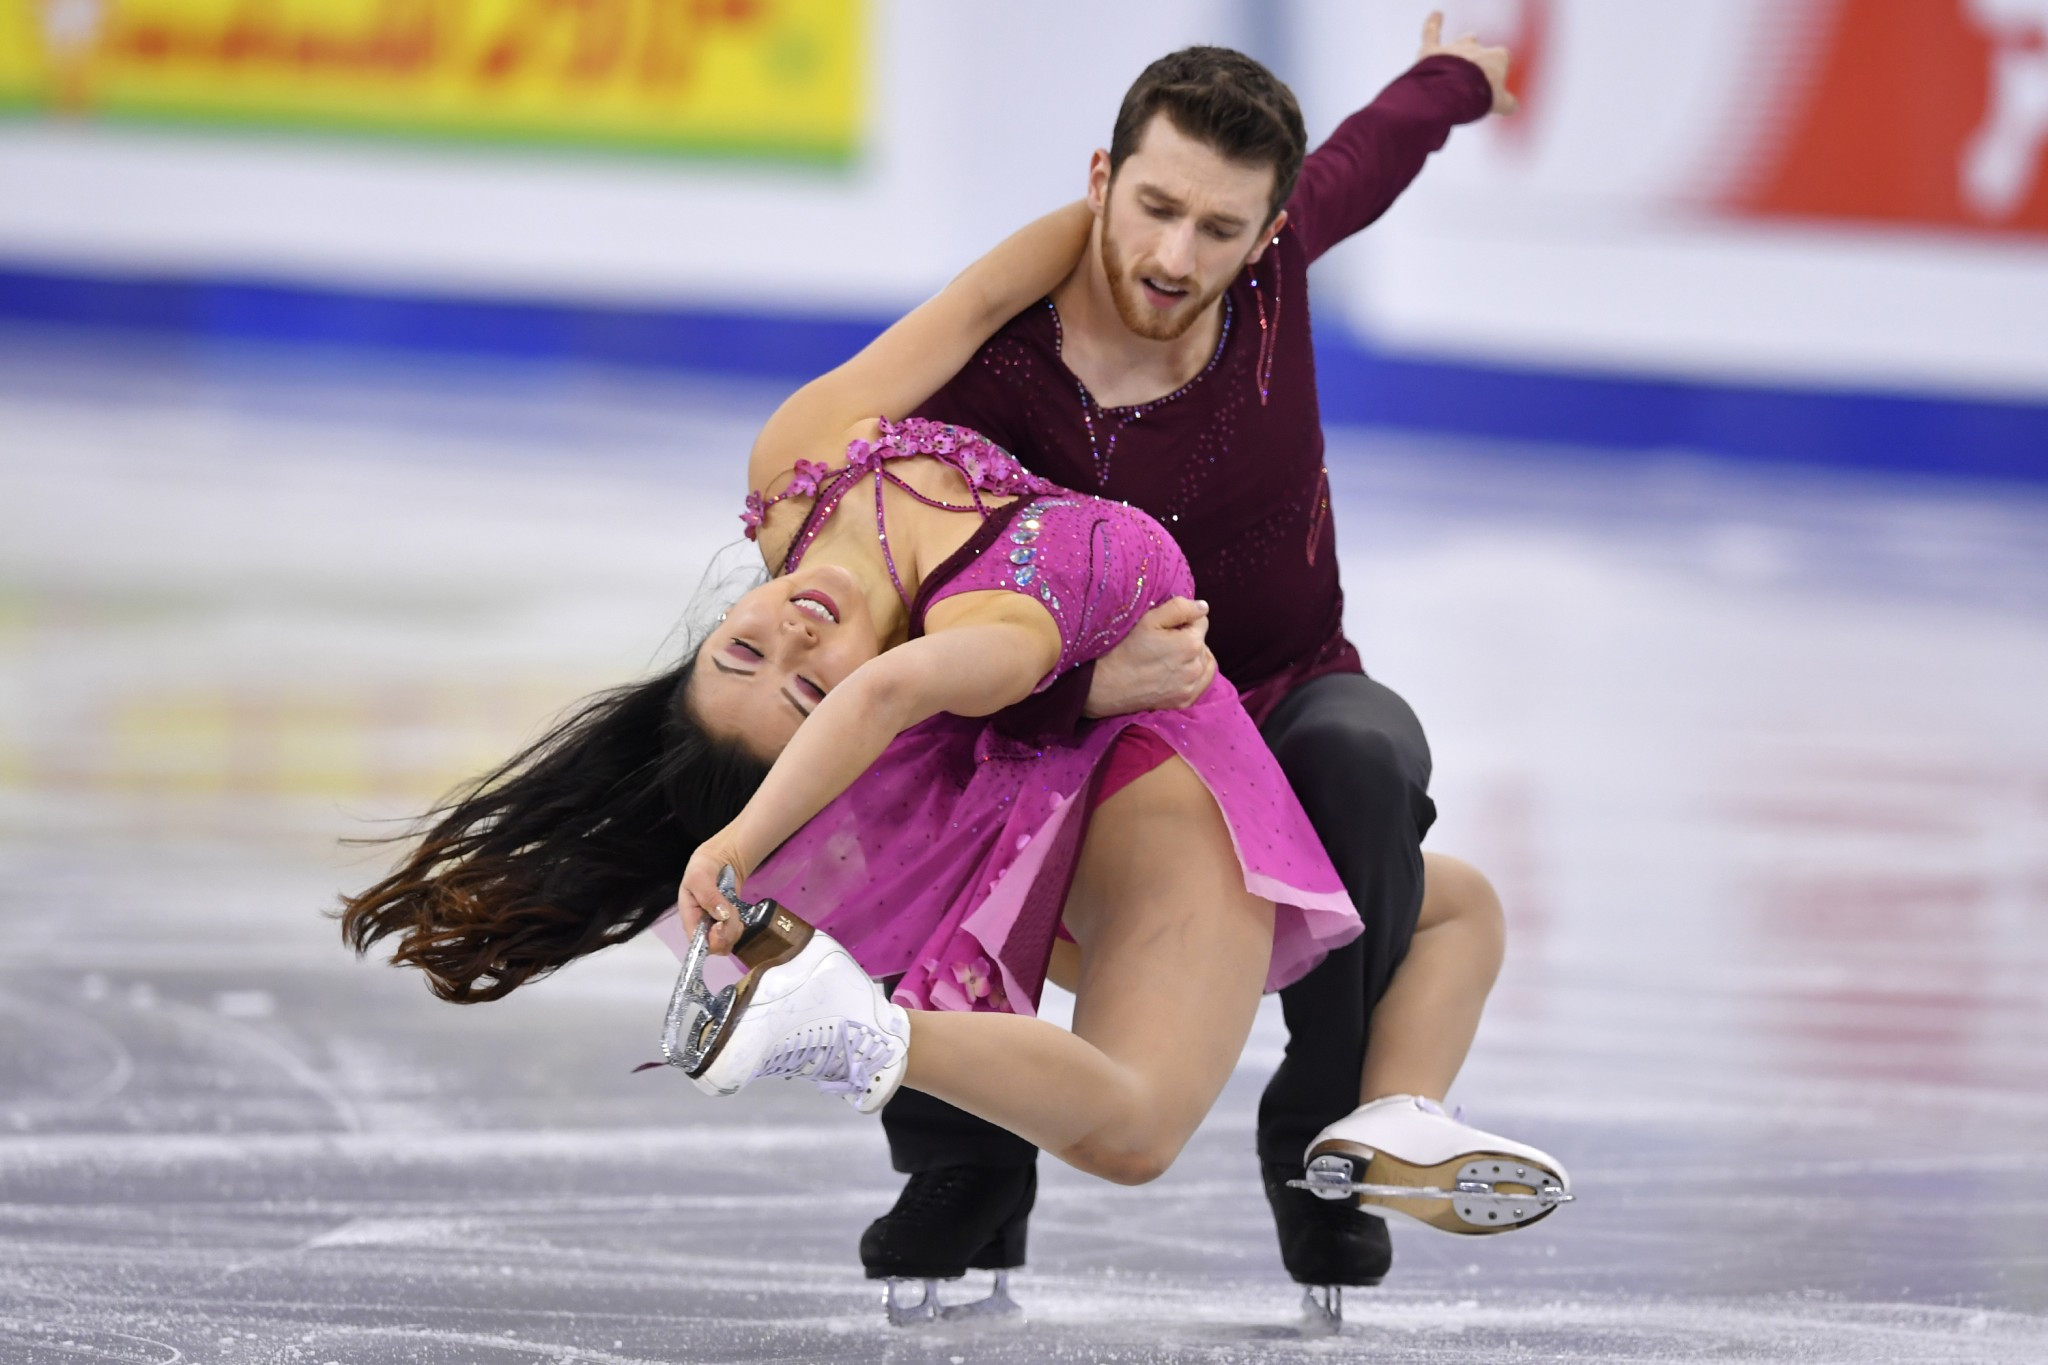 American ice skater latest foreign athlete to be given South Korean passport for Pyeongchang 2018